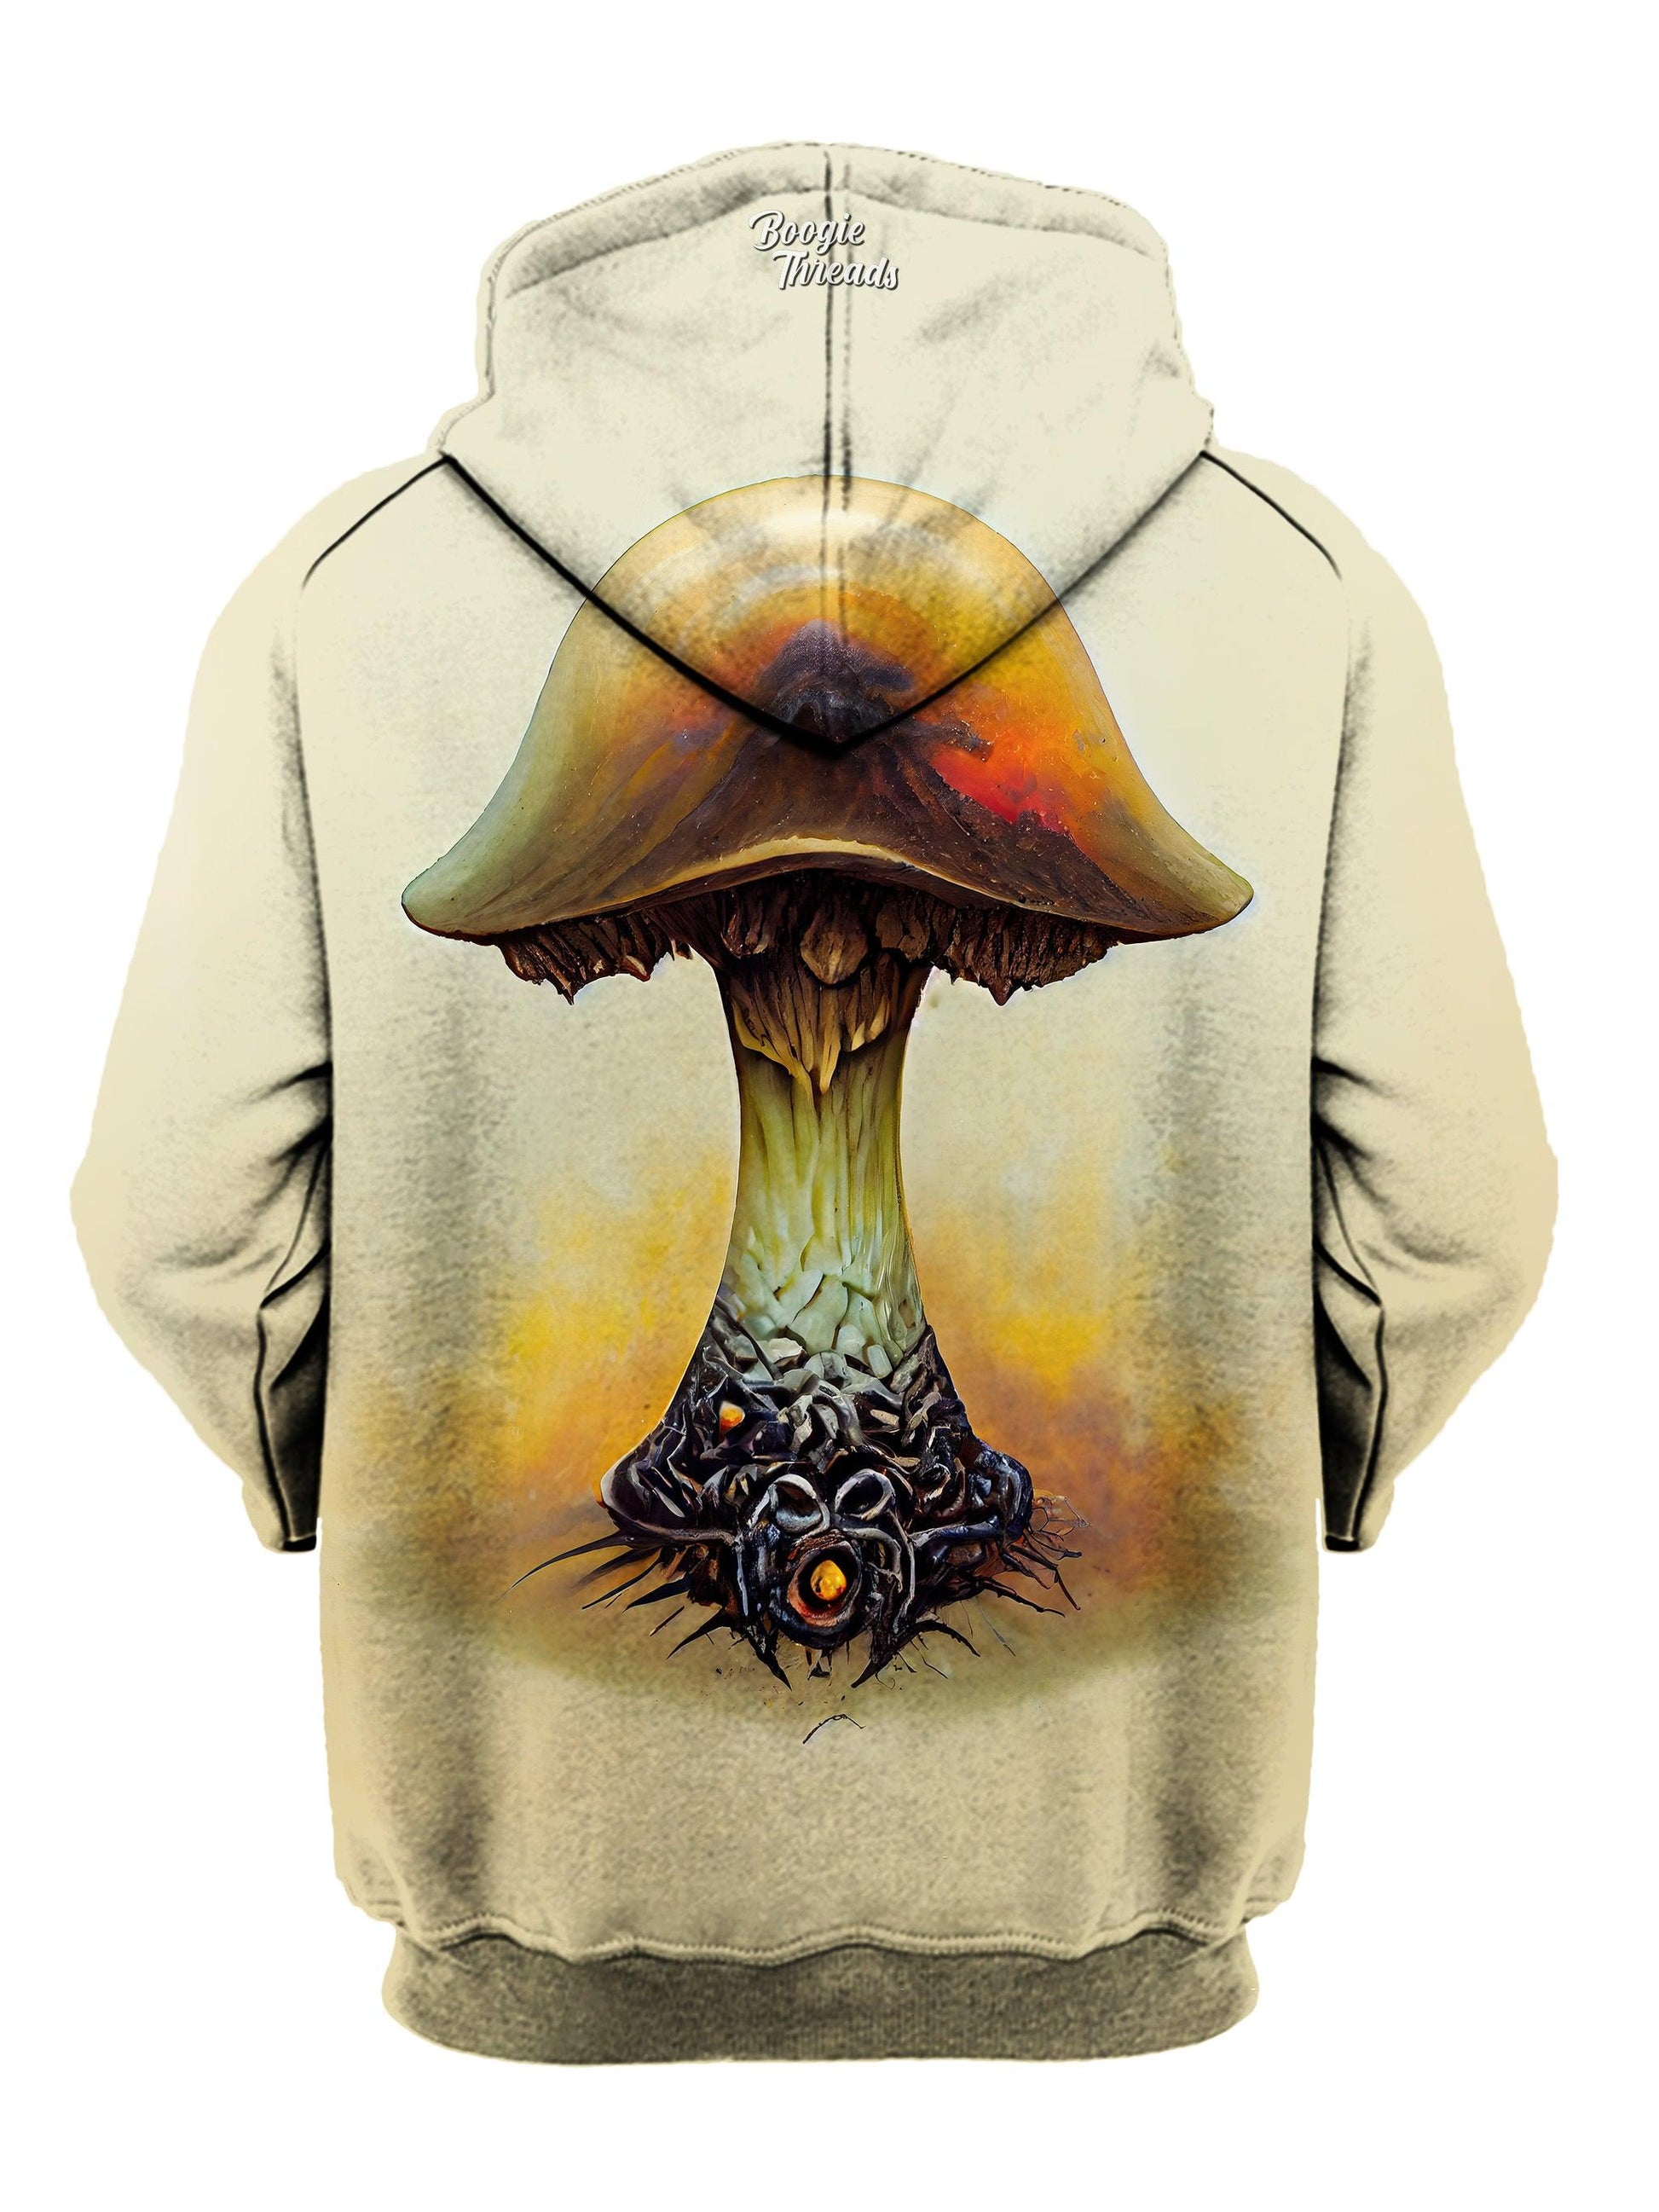 Omen Of Empathy Unisex Pullover Hoodie - EDM Festival Clothing - Boogie Threads